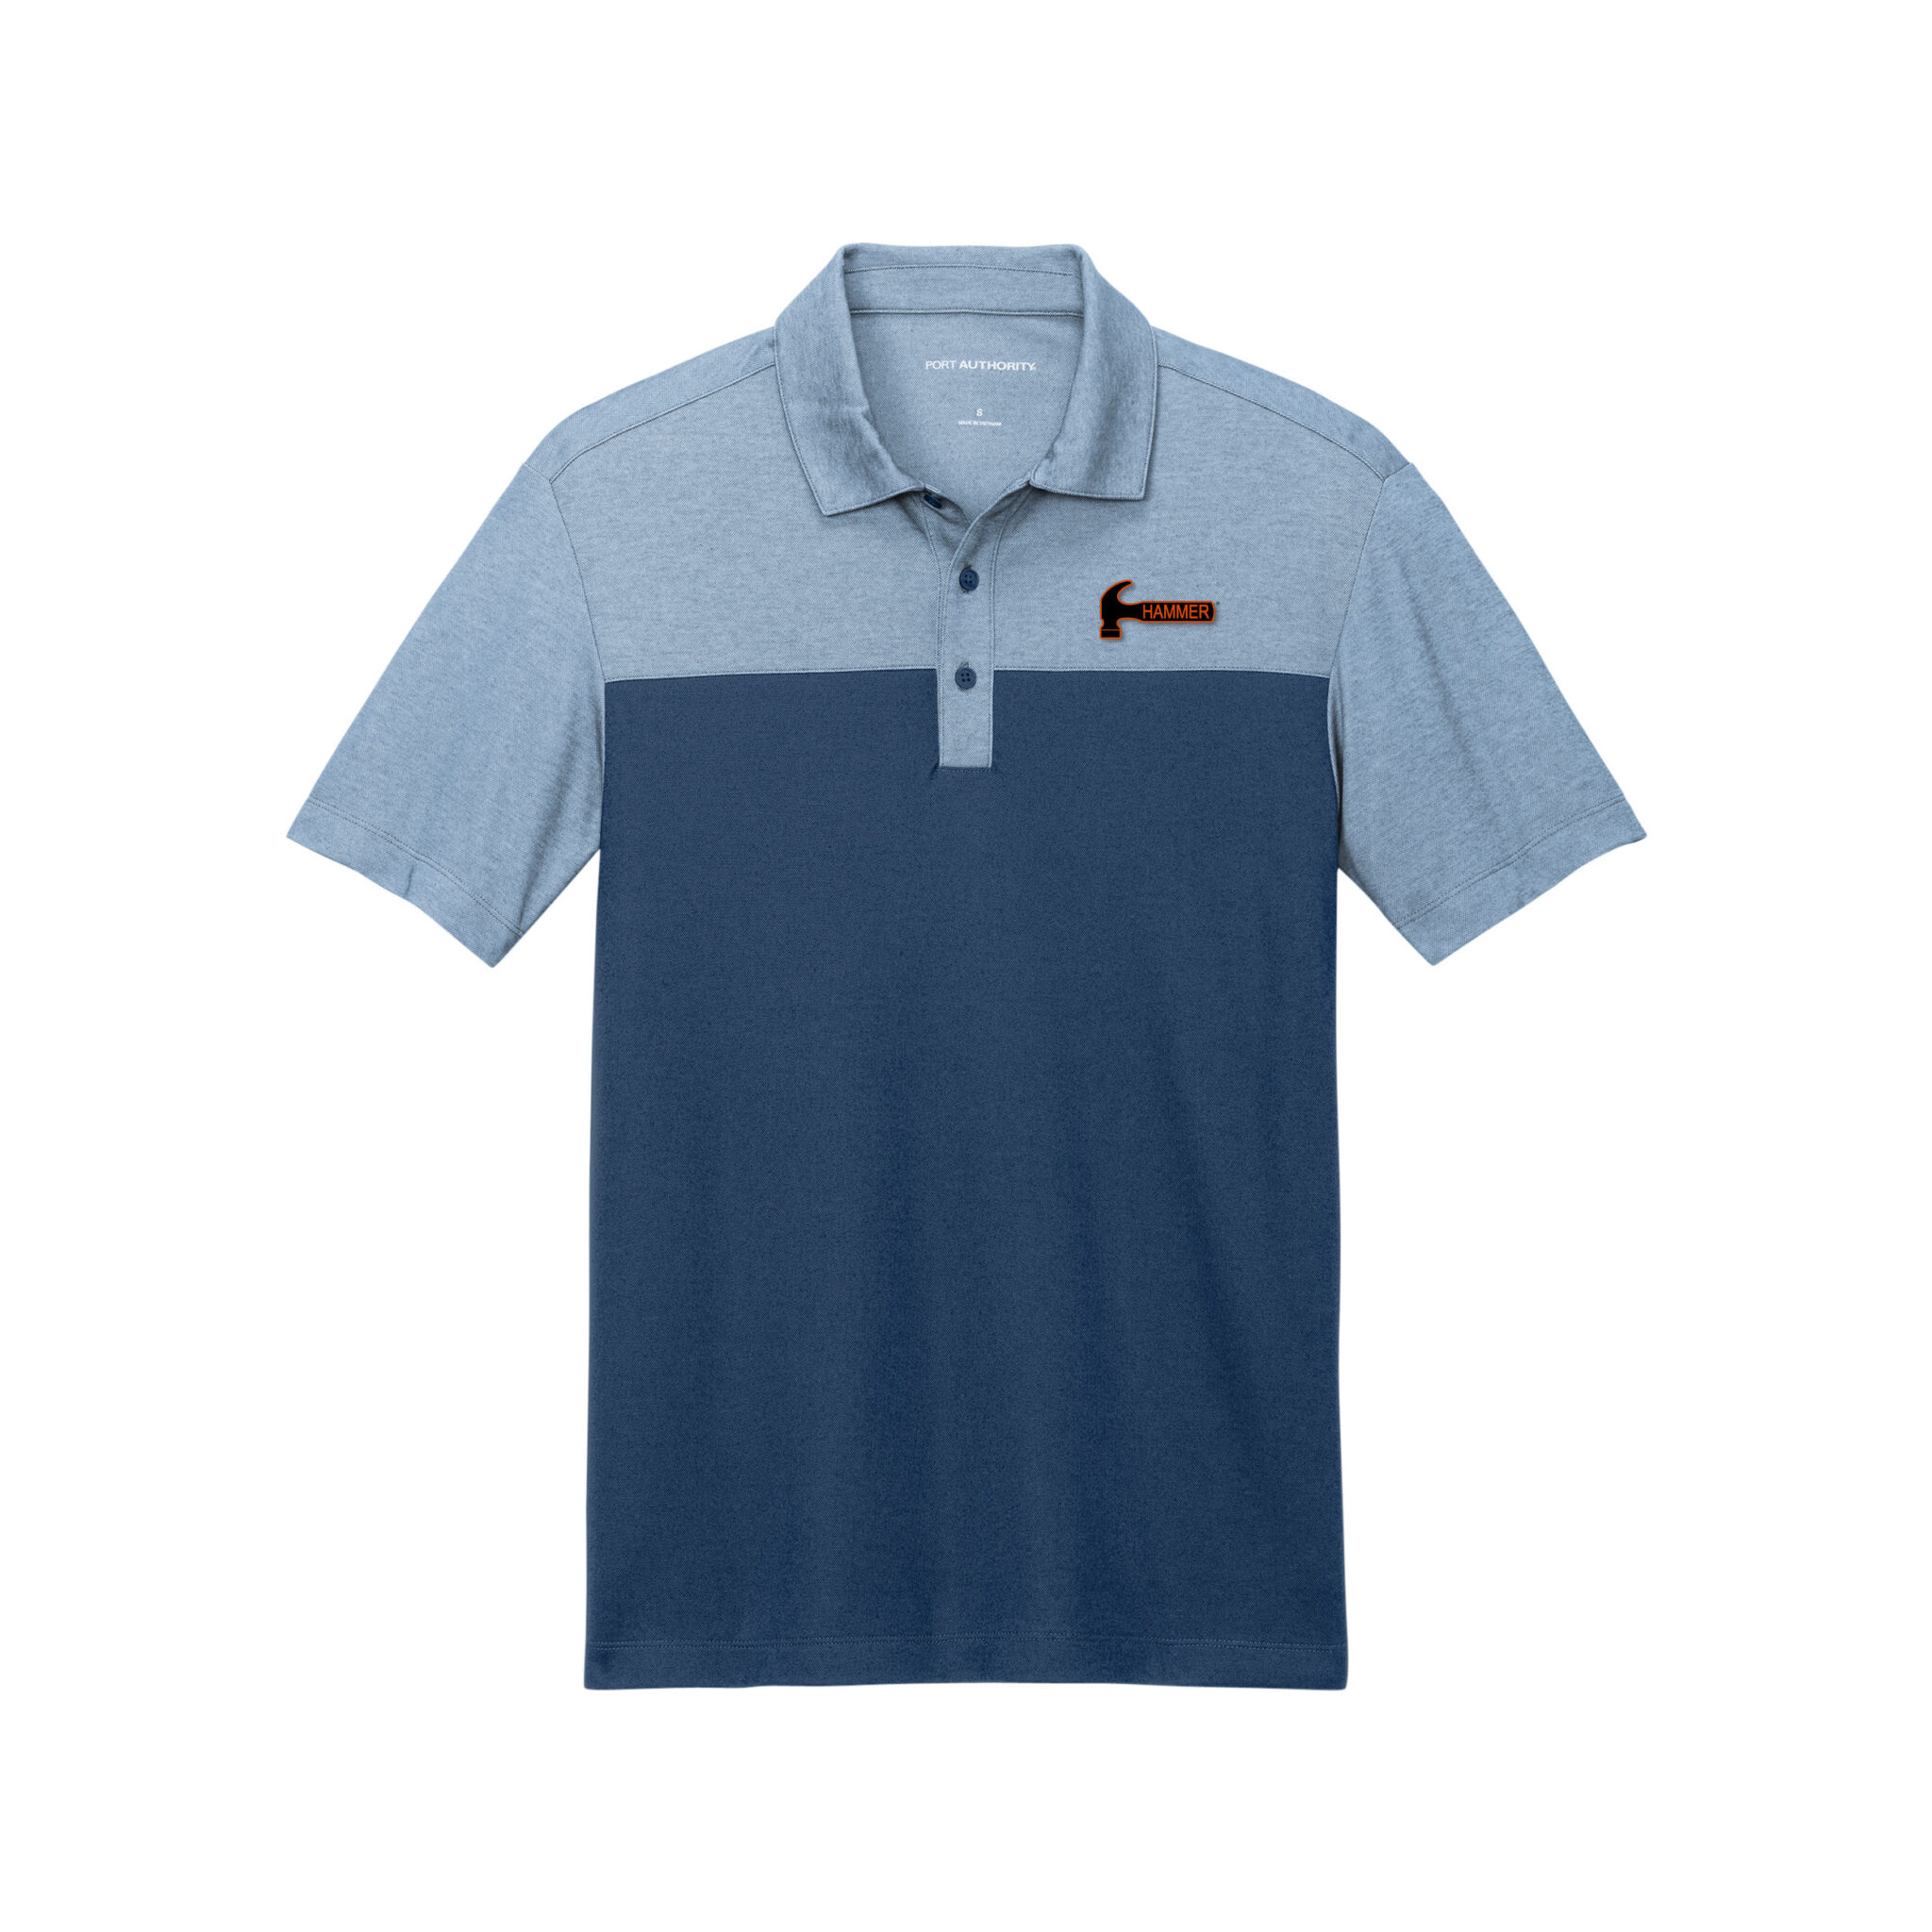 Image of Add a Hammer Polo to your closet!